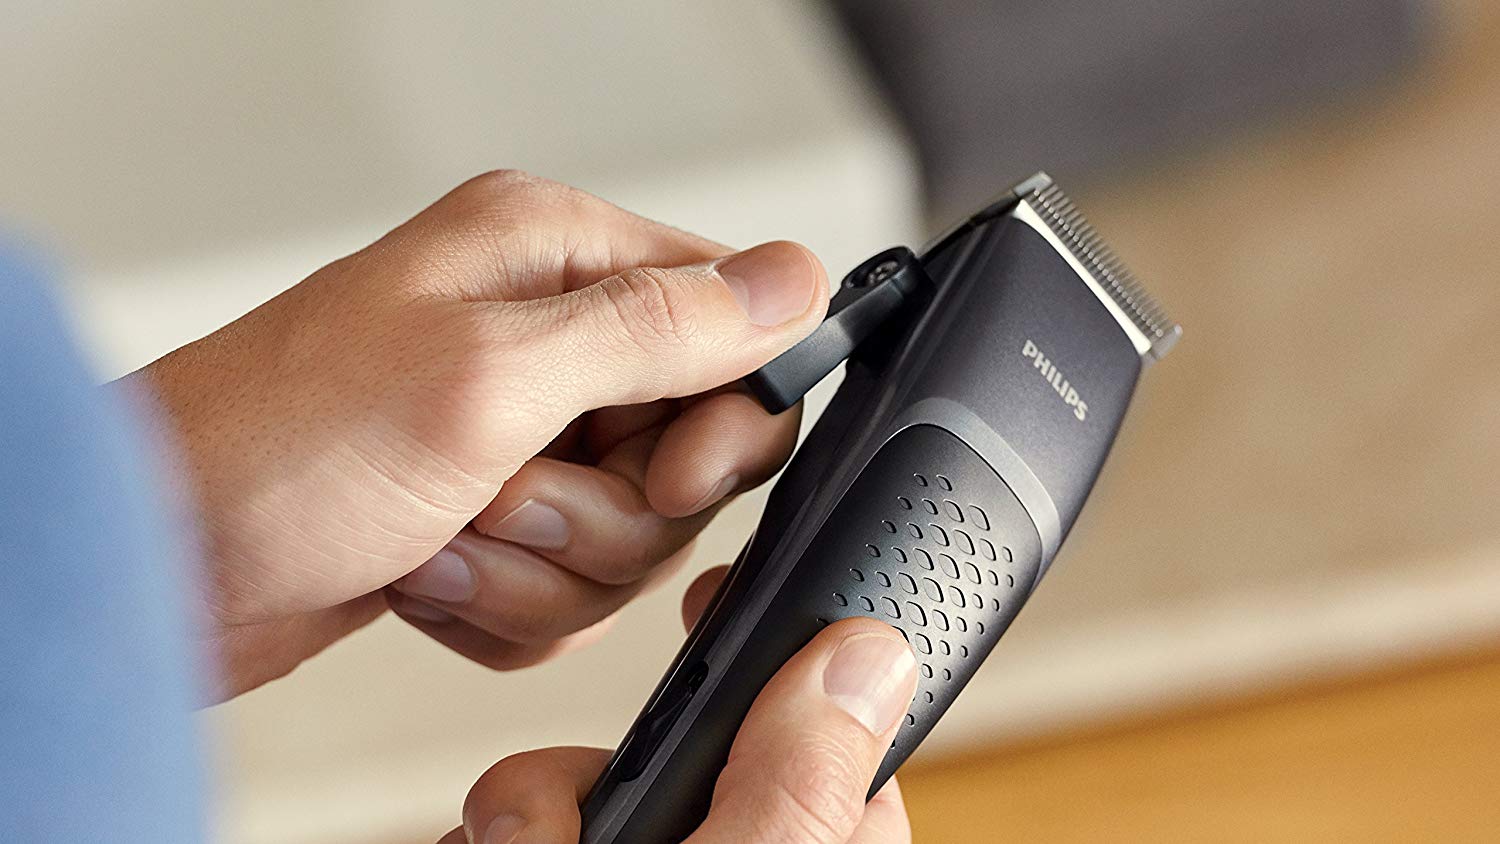 philips home clipper series 3000